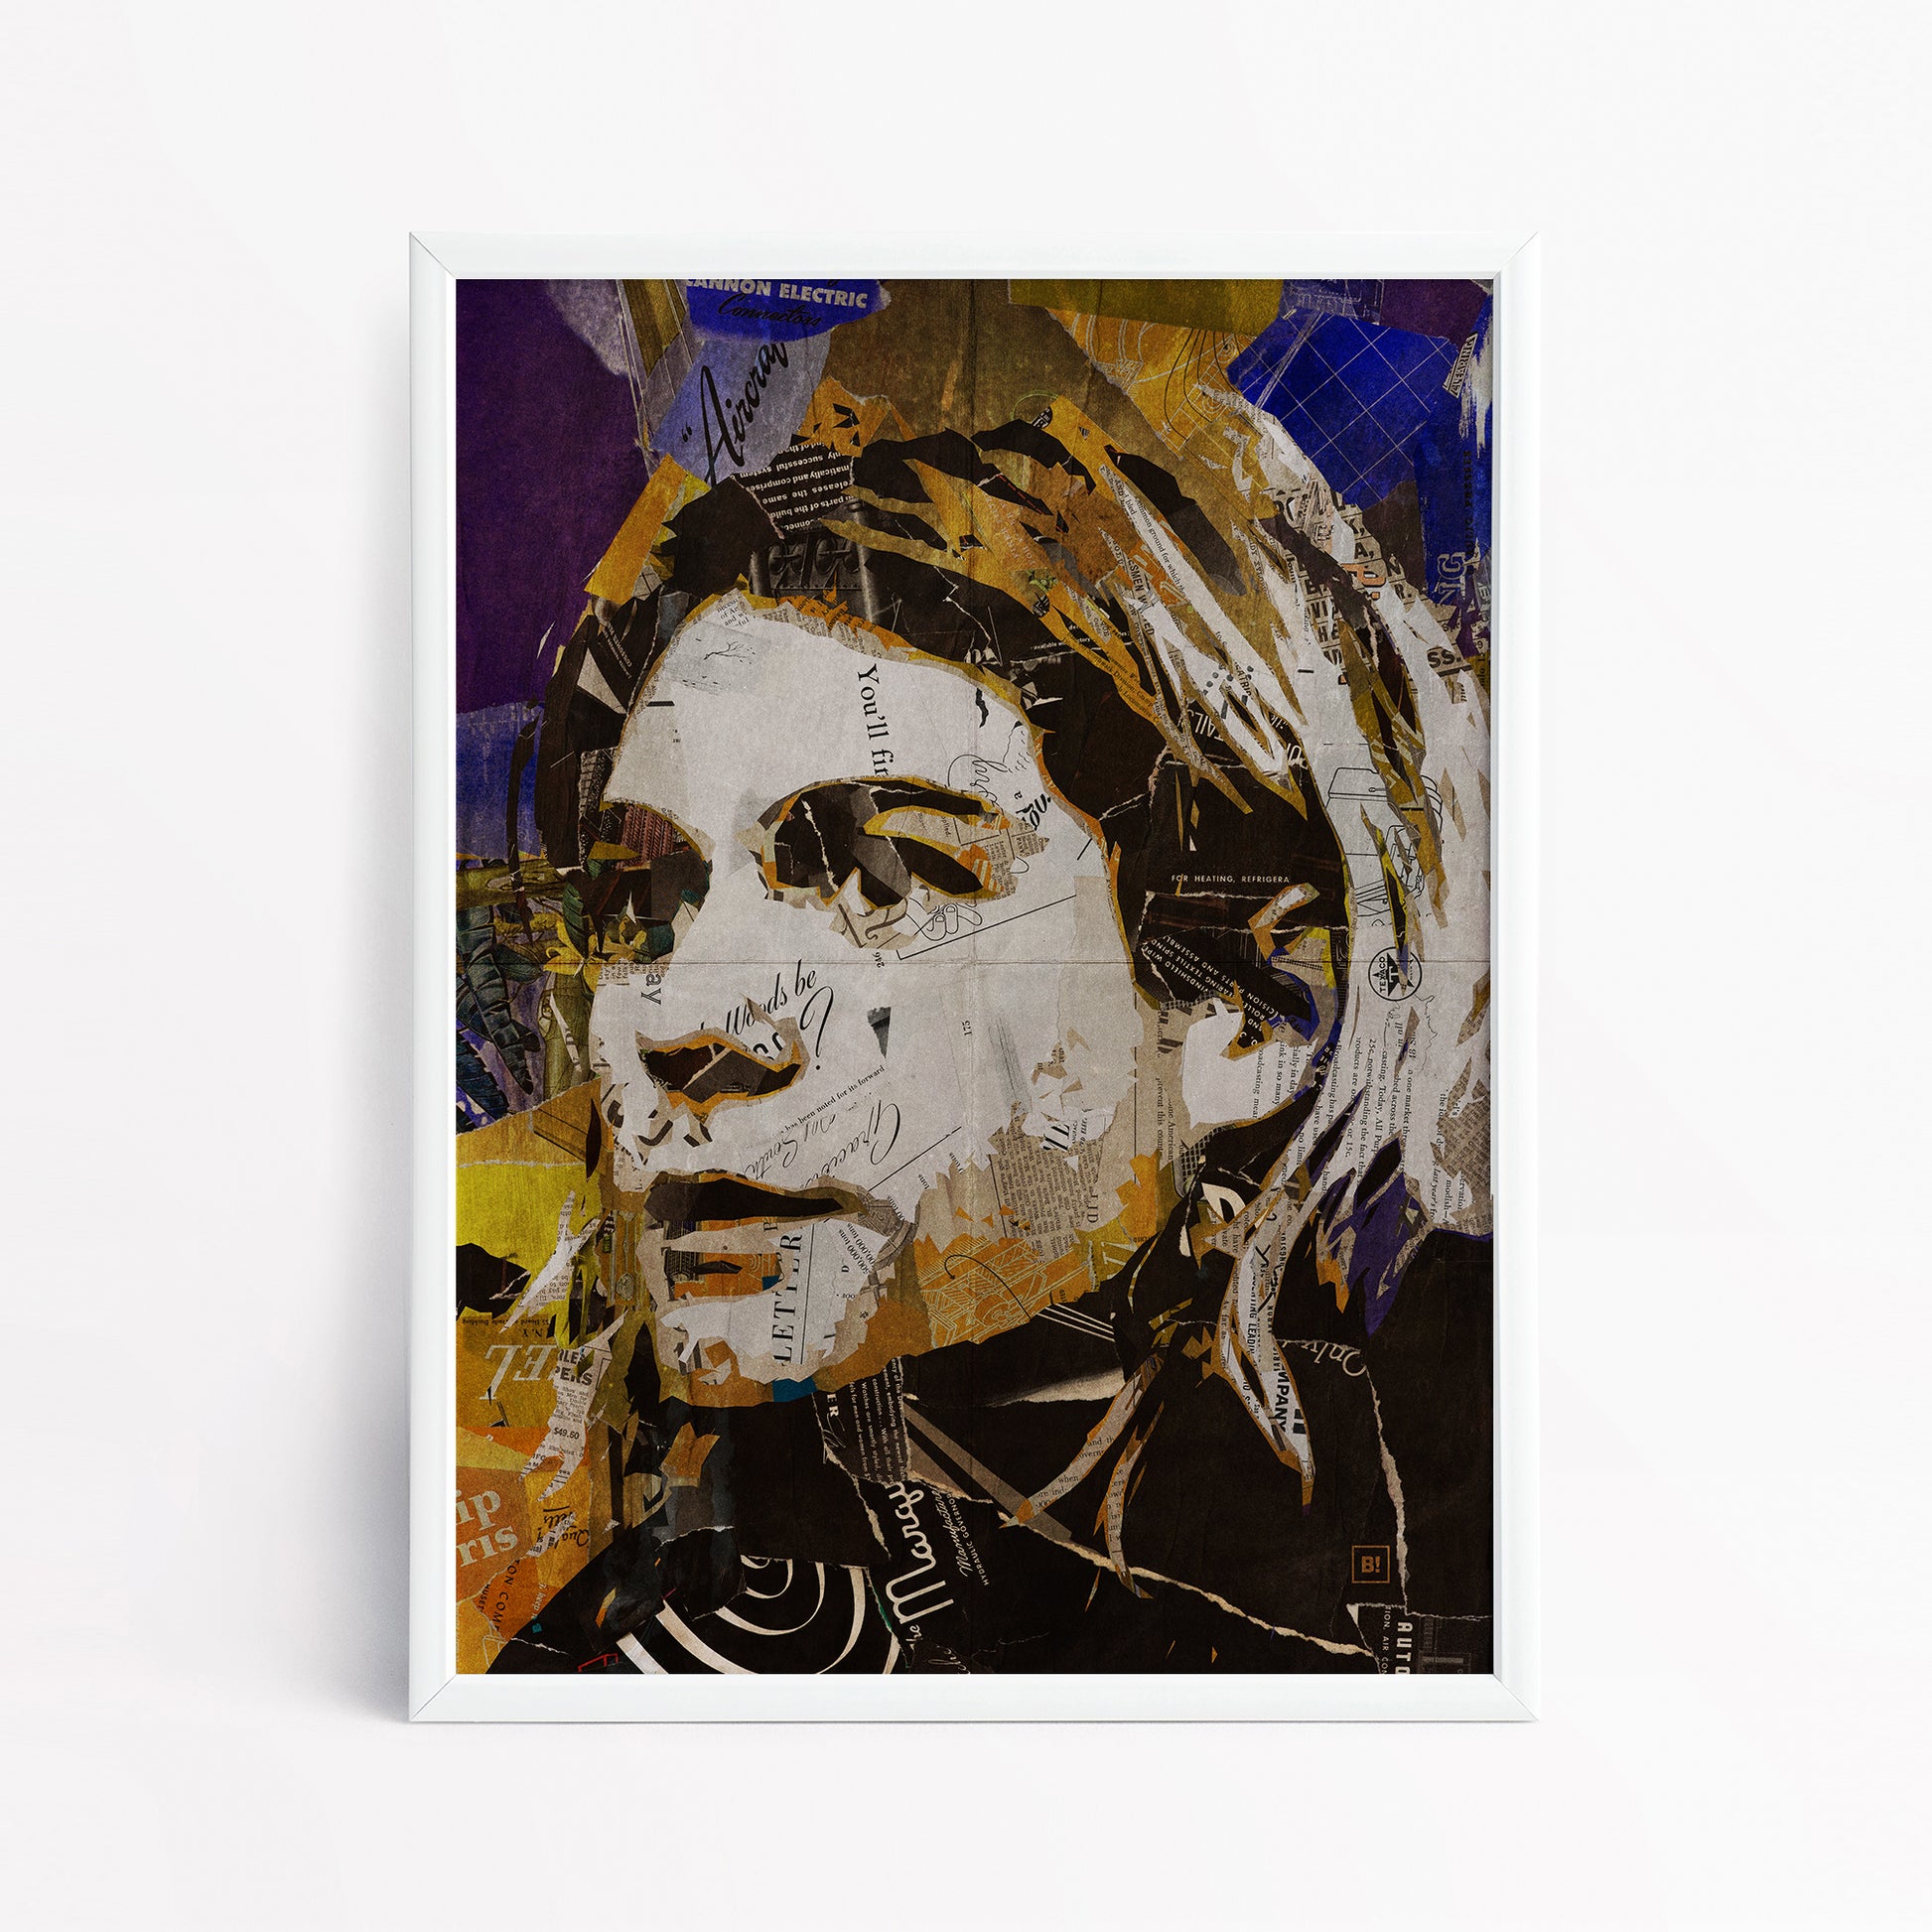 Be inspired by our iconic collage portrait art print of Kurt Cobain. This artwork has been printed using the giclée process on archival acid-free paper and is presented in a sleek white frame, showcasing its timeless beauty in every detail.